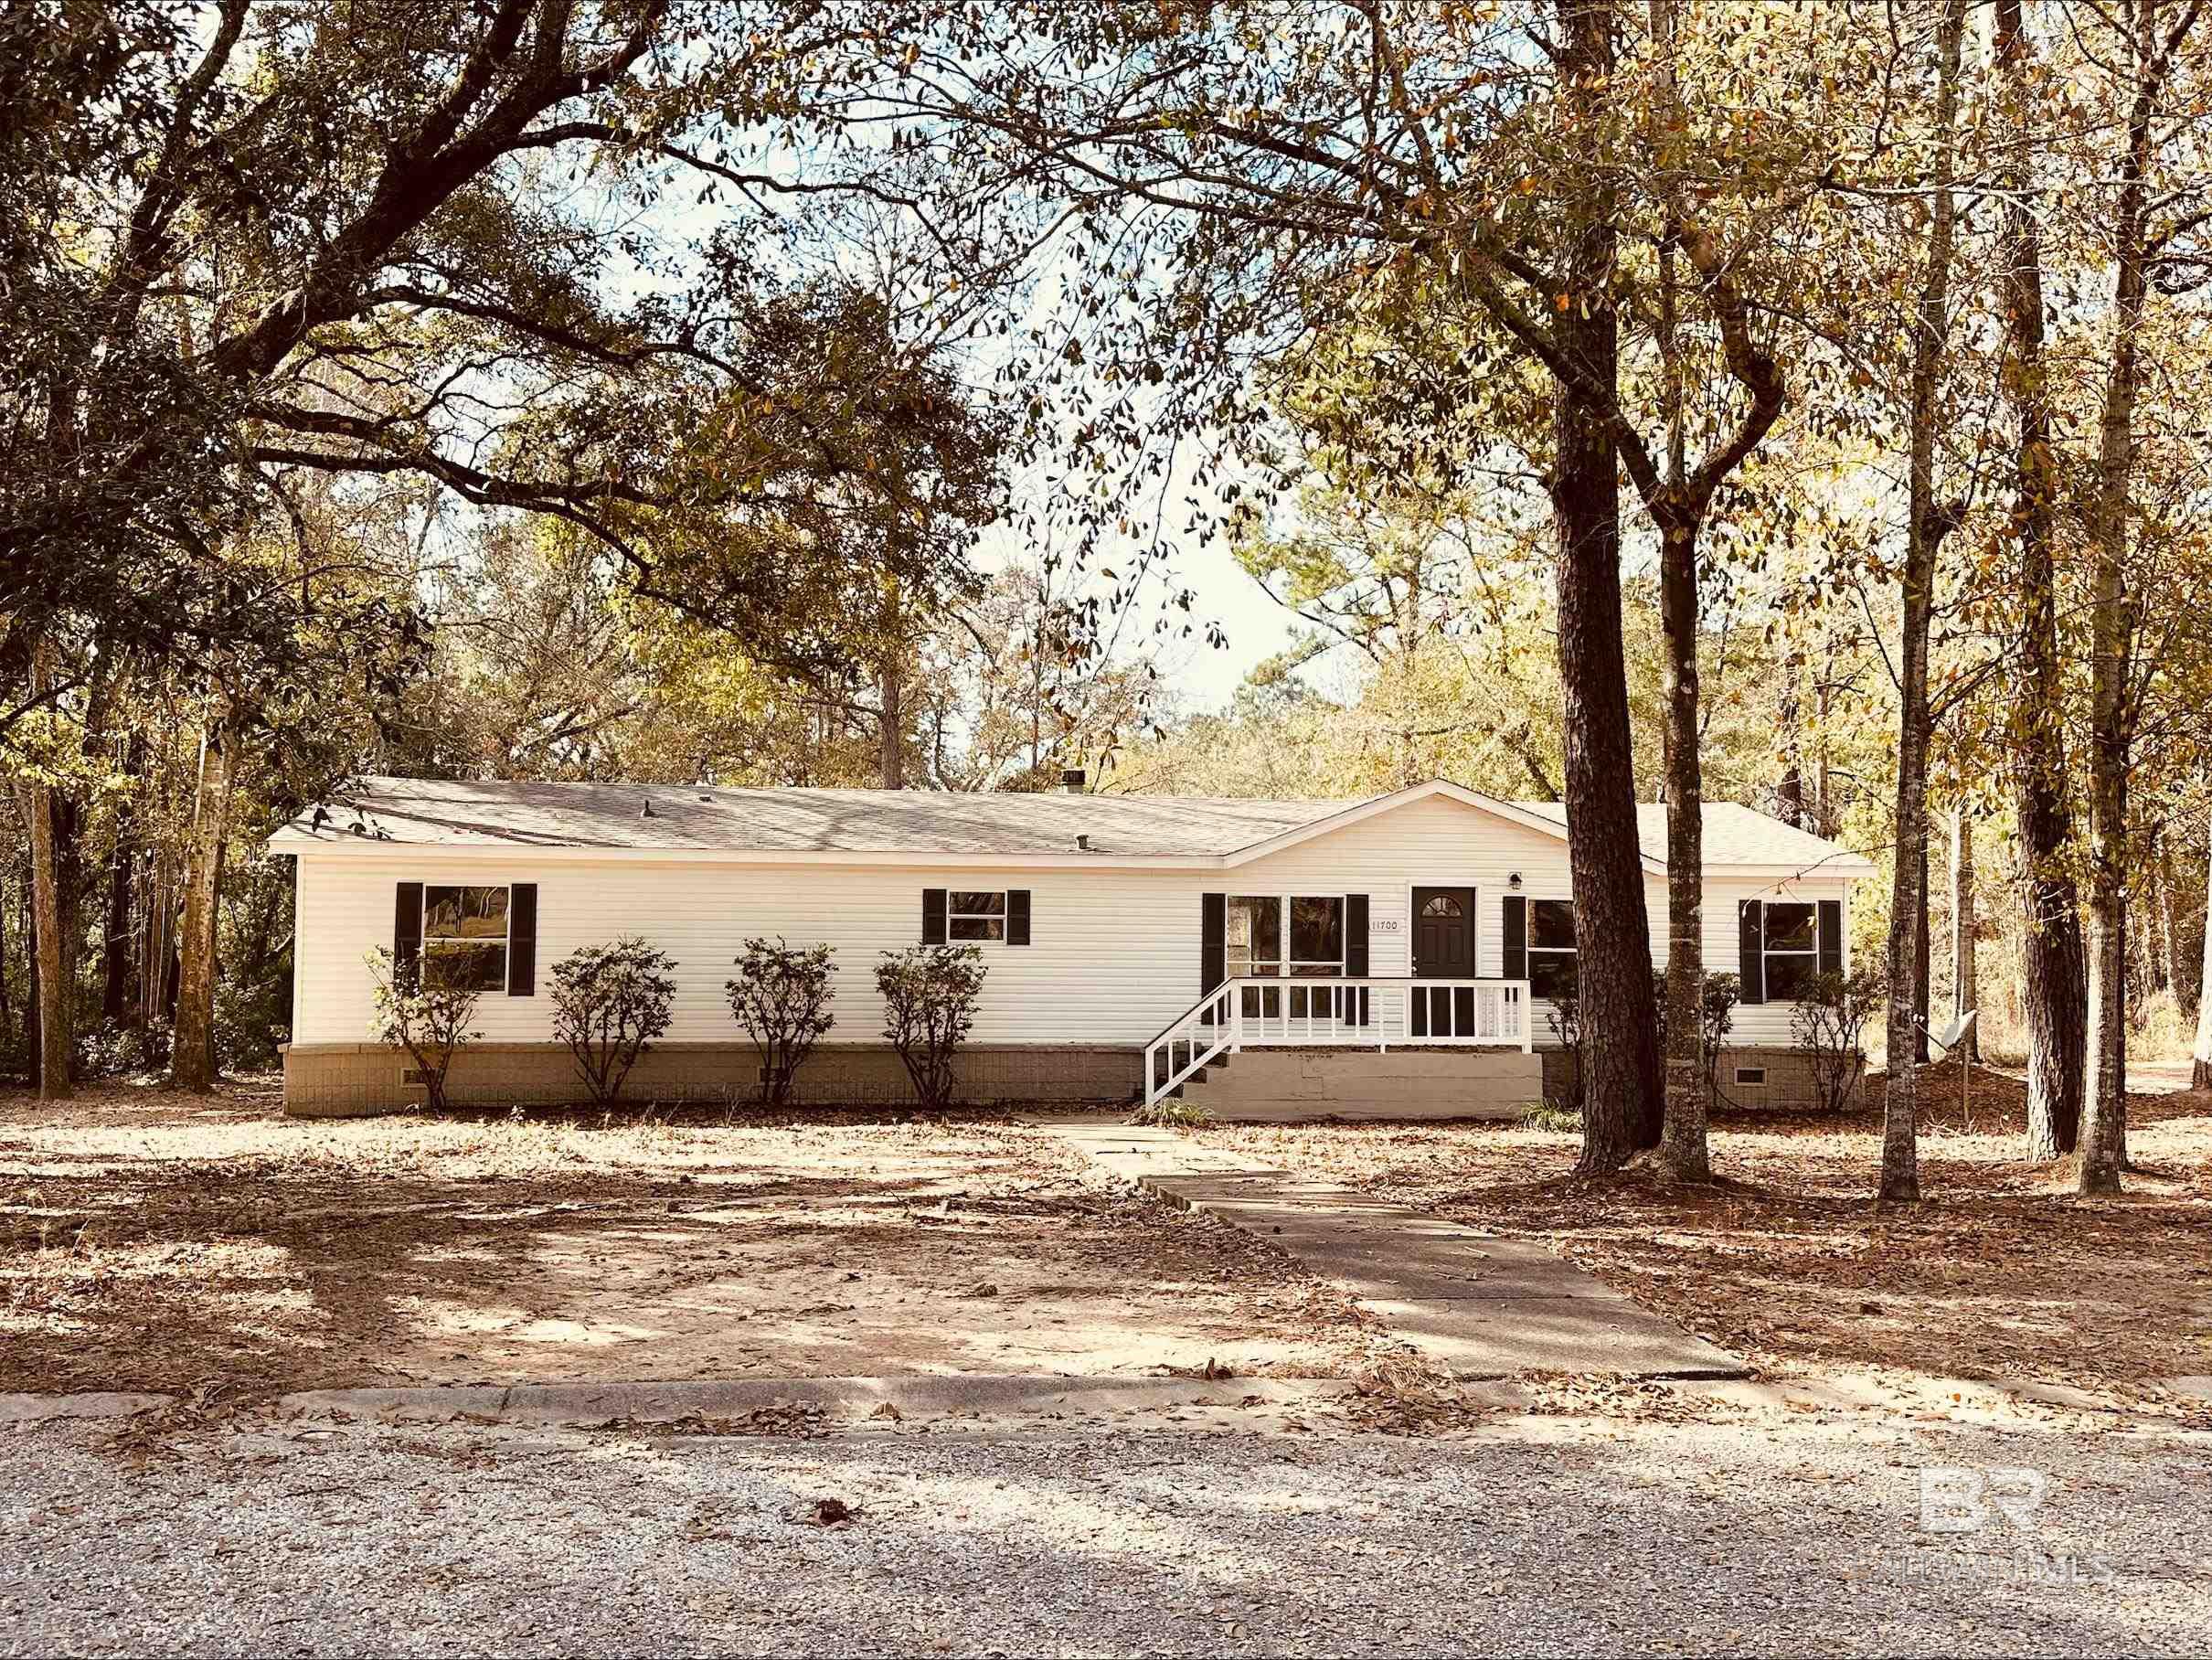 NEWLY RENOVATED,  3 bedroom 2 bath mobile home features new flooring and appliances. Fresh paint throughout. Whether you are looking for an investment opportunity or affordable housing on the Eastern Shore this home is a MUST SEE. Located in the desirable Belforest area of Daphne.  Contact selling agent for additional information or to schedule a showing.